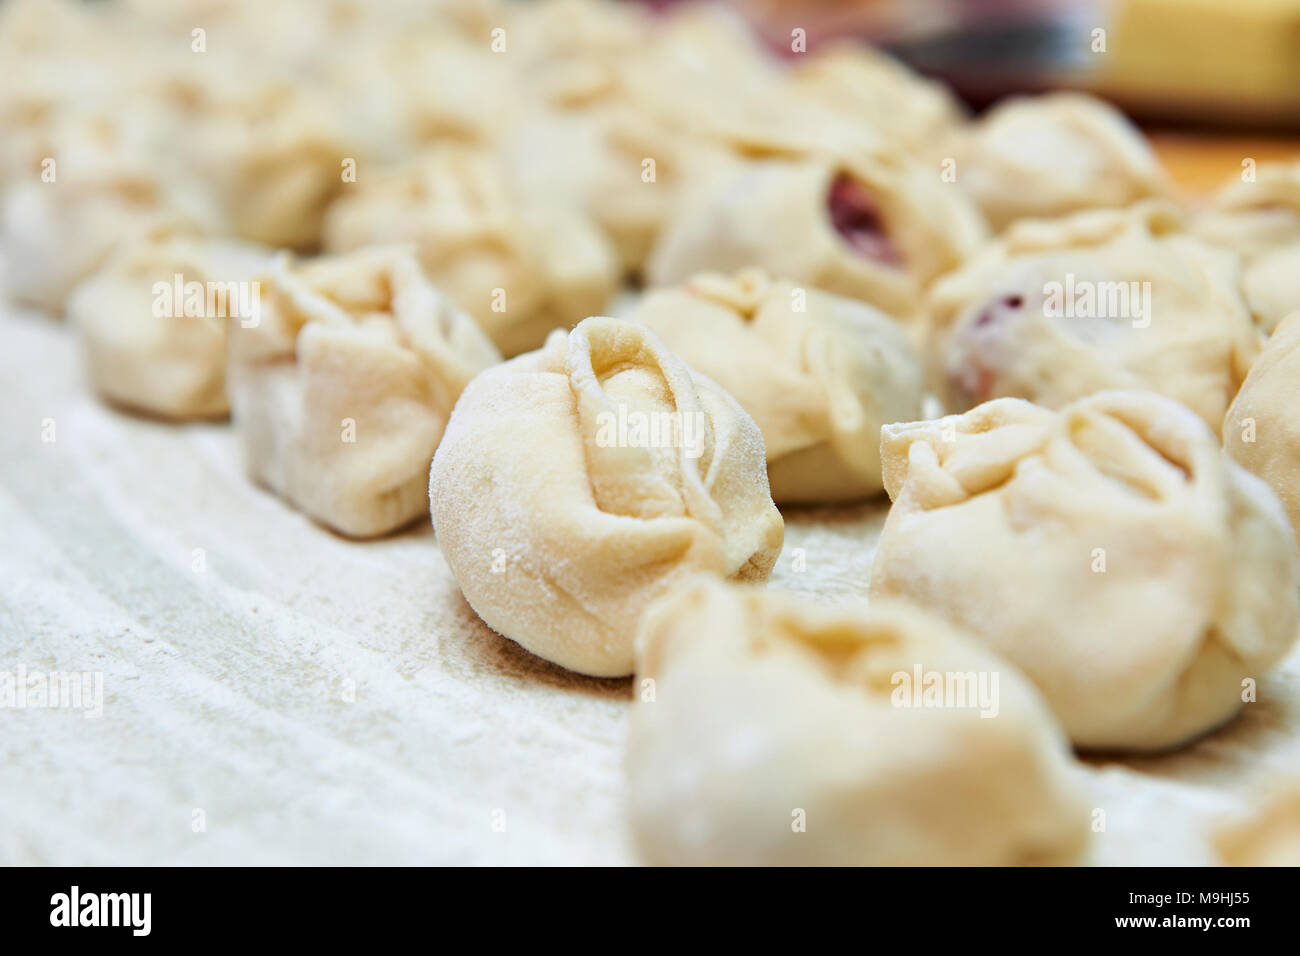 Homemade ravioli with minced meat Stock Photo